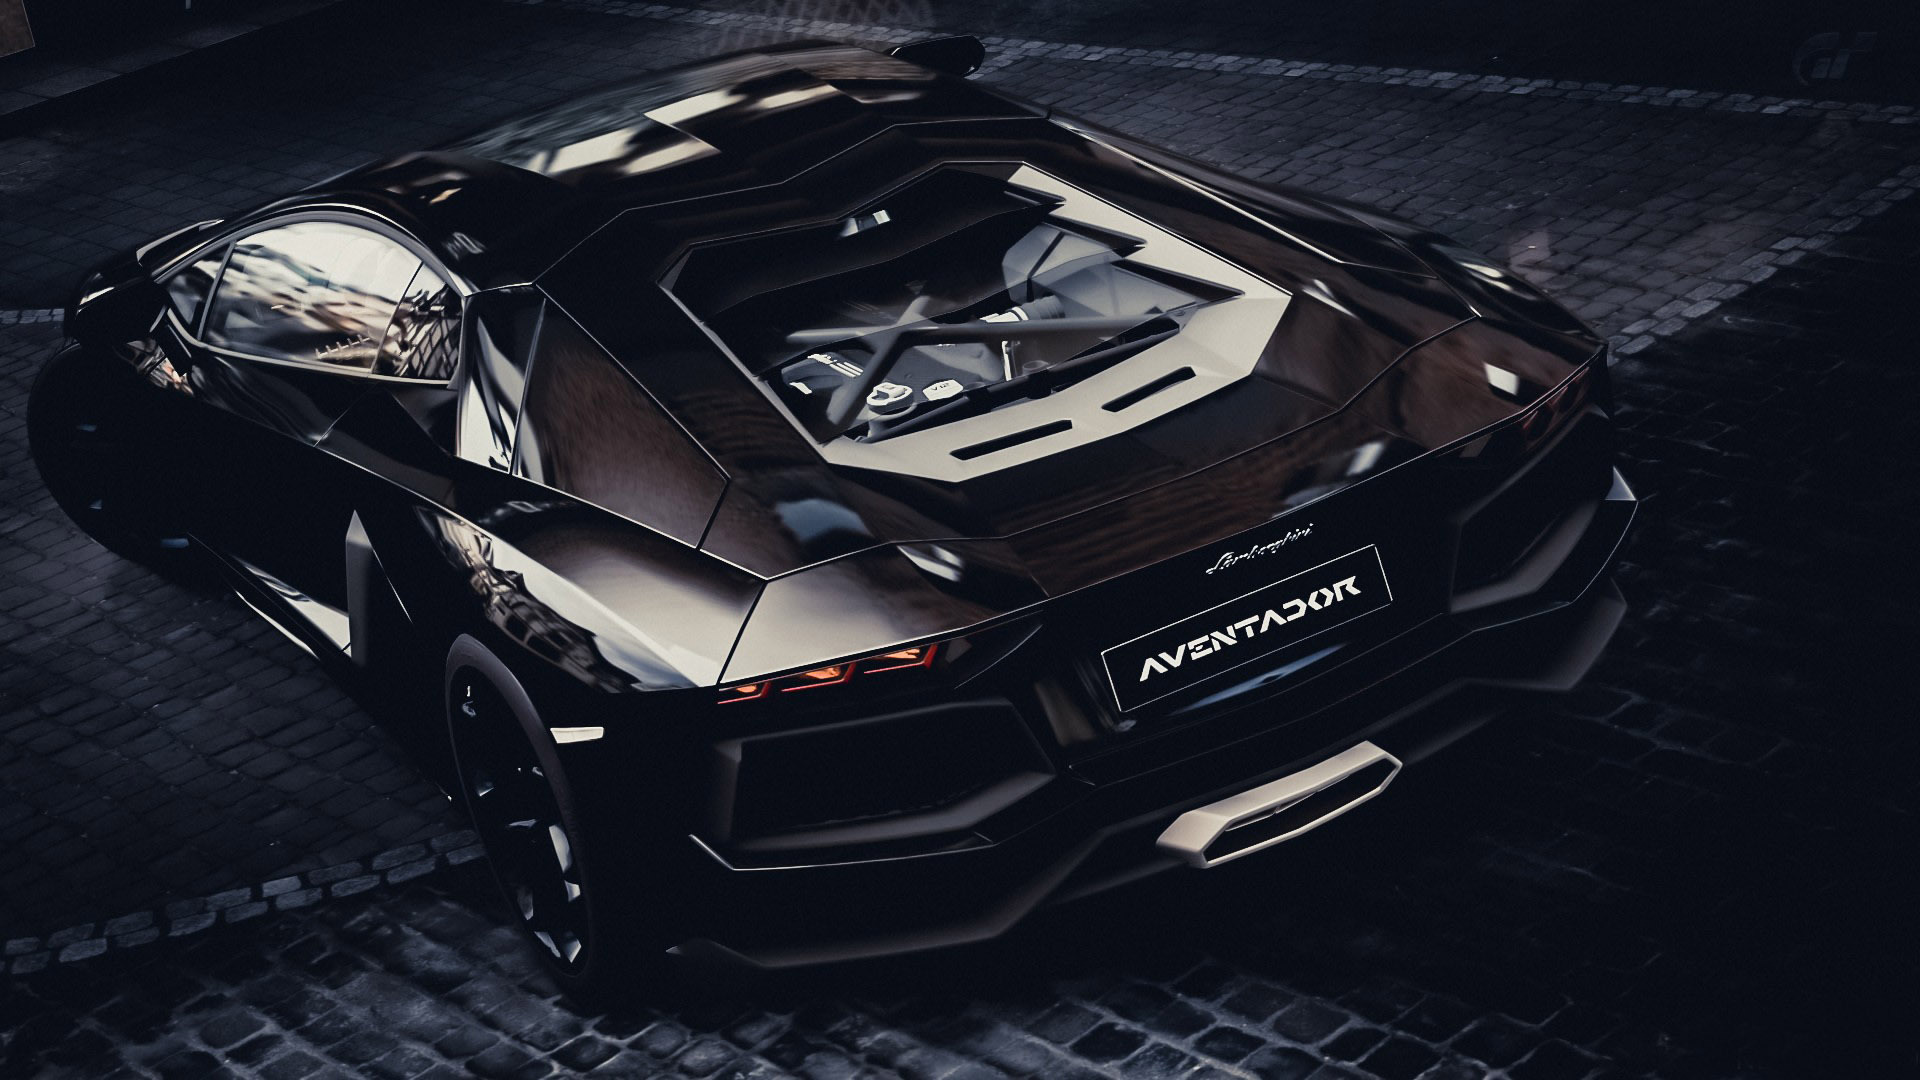 Lamborghini Aventador Wallpapers HD A31 Black - lamborghini aventador desktop sports cars, race cars, luxury cars, expensive cars, wallpapers pictures images free download